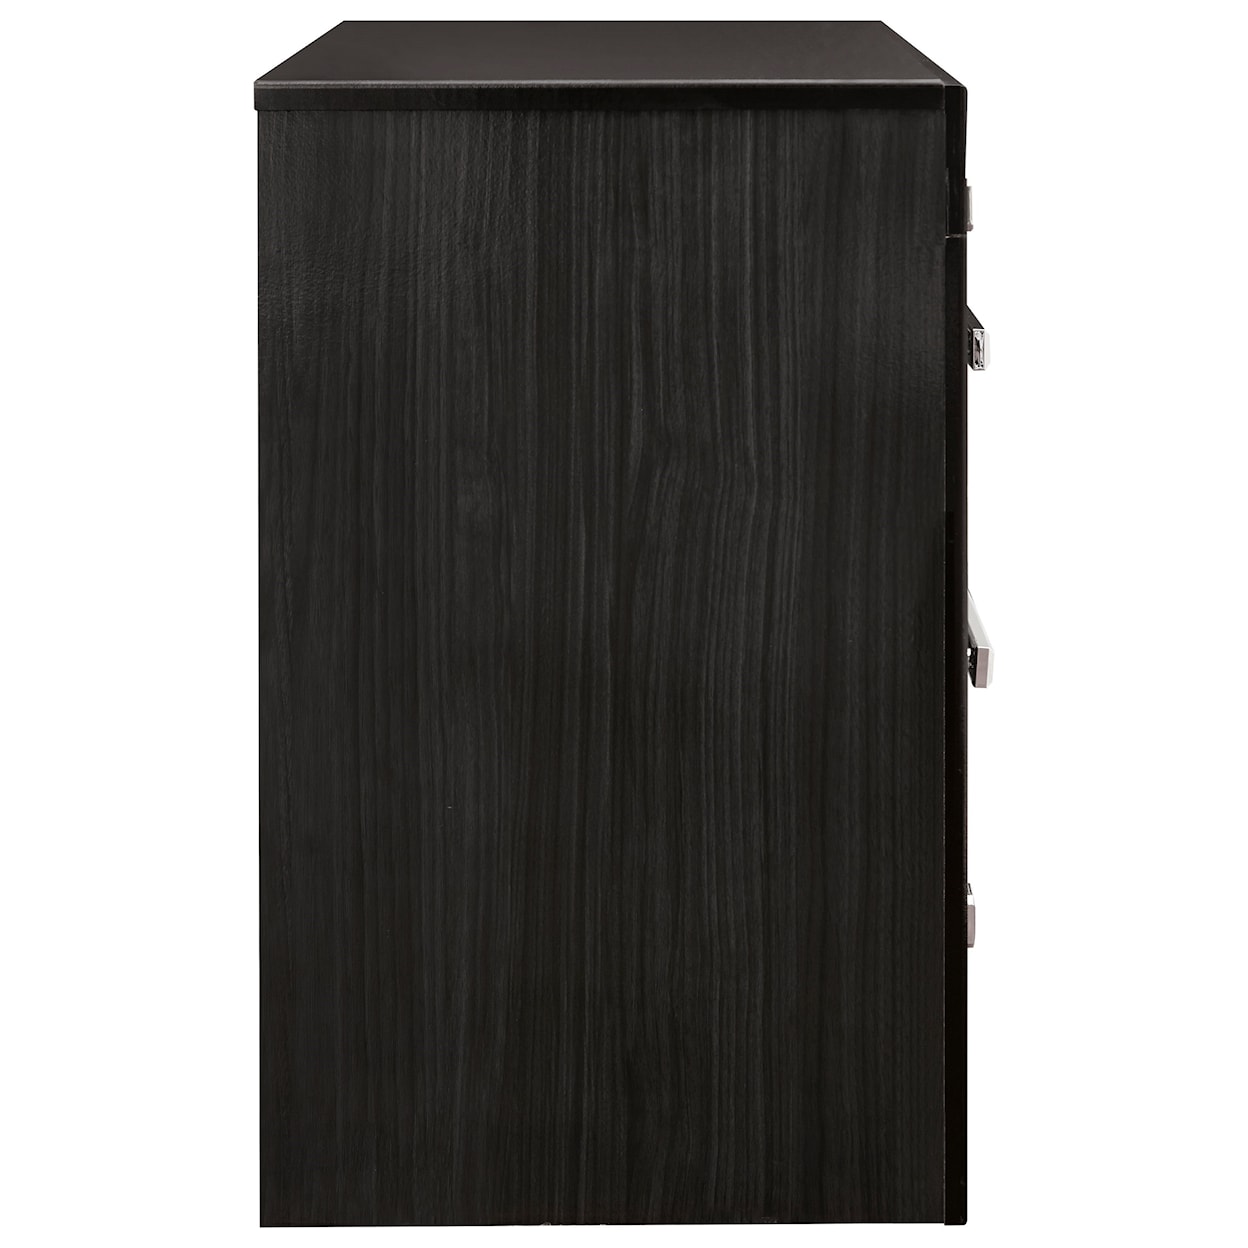 Signature Design by Ashley Furniture Kaydell 2-Drawer Nightstand